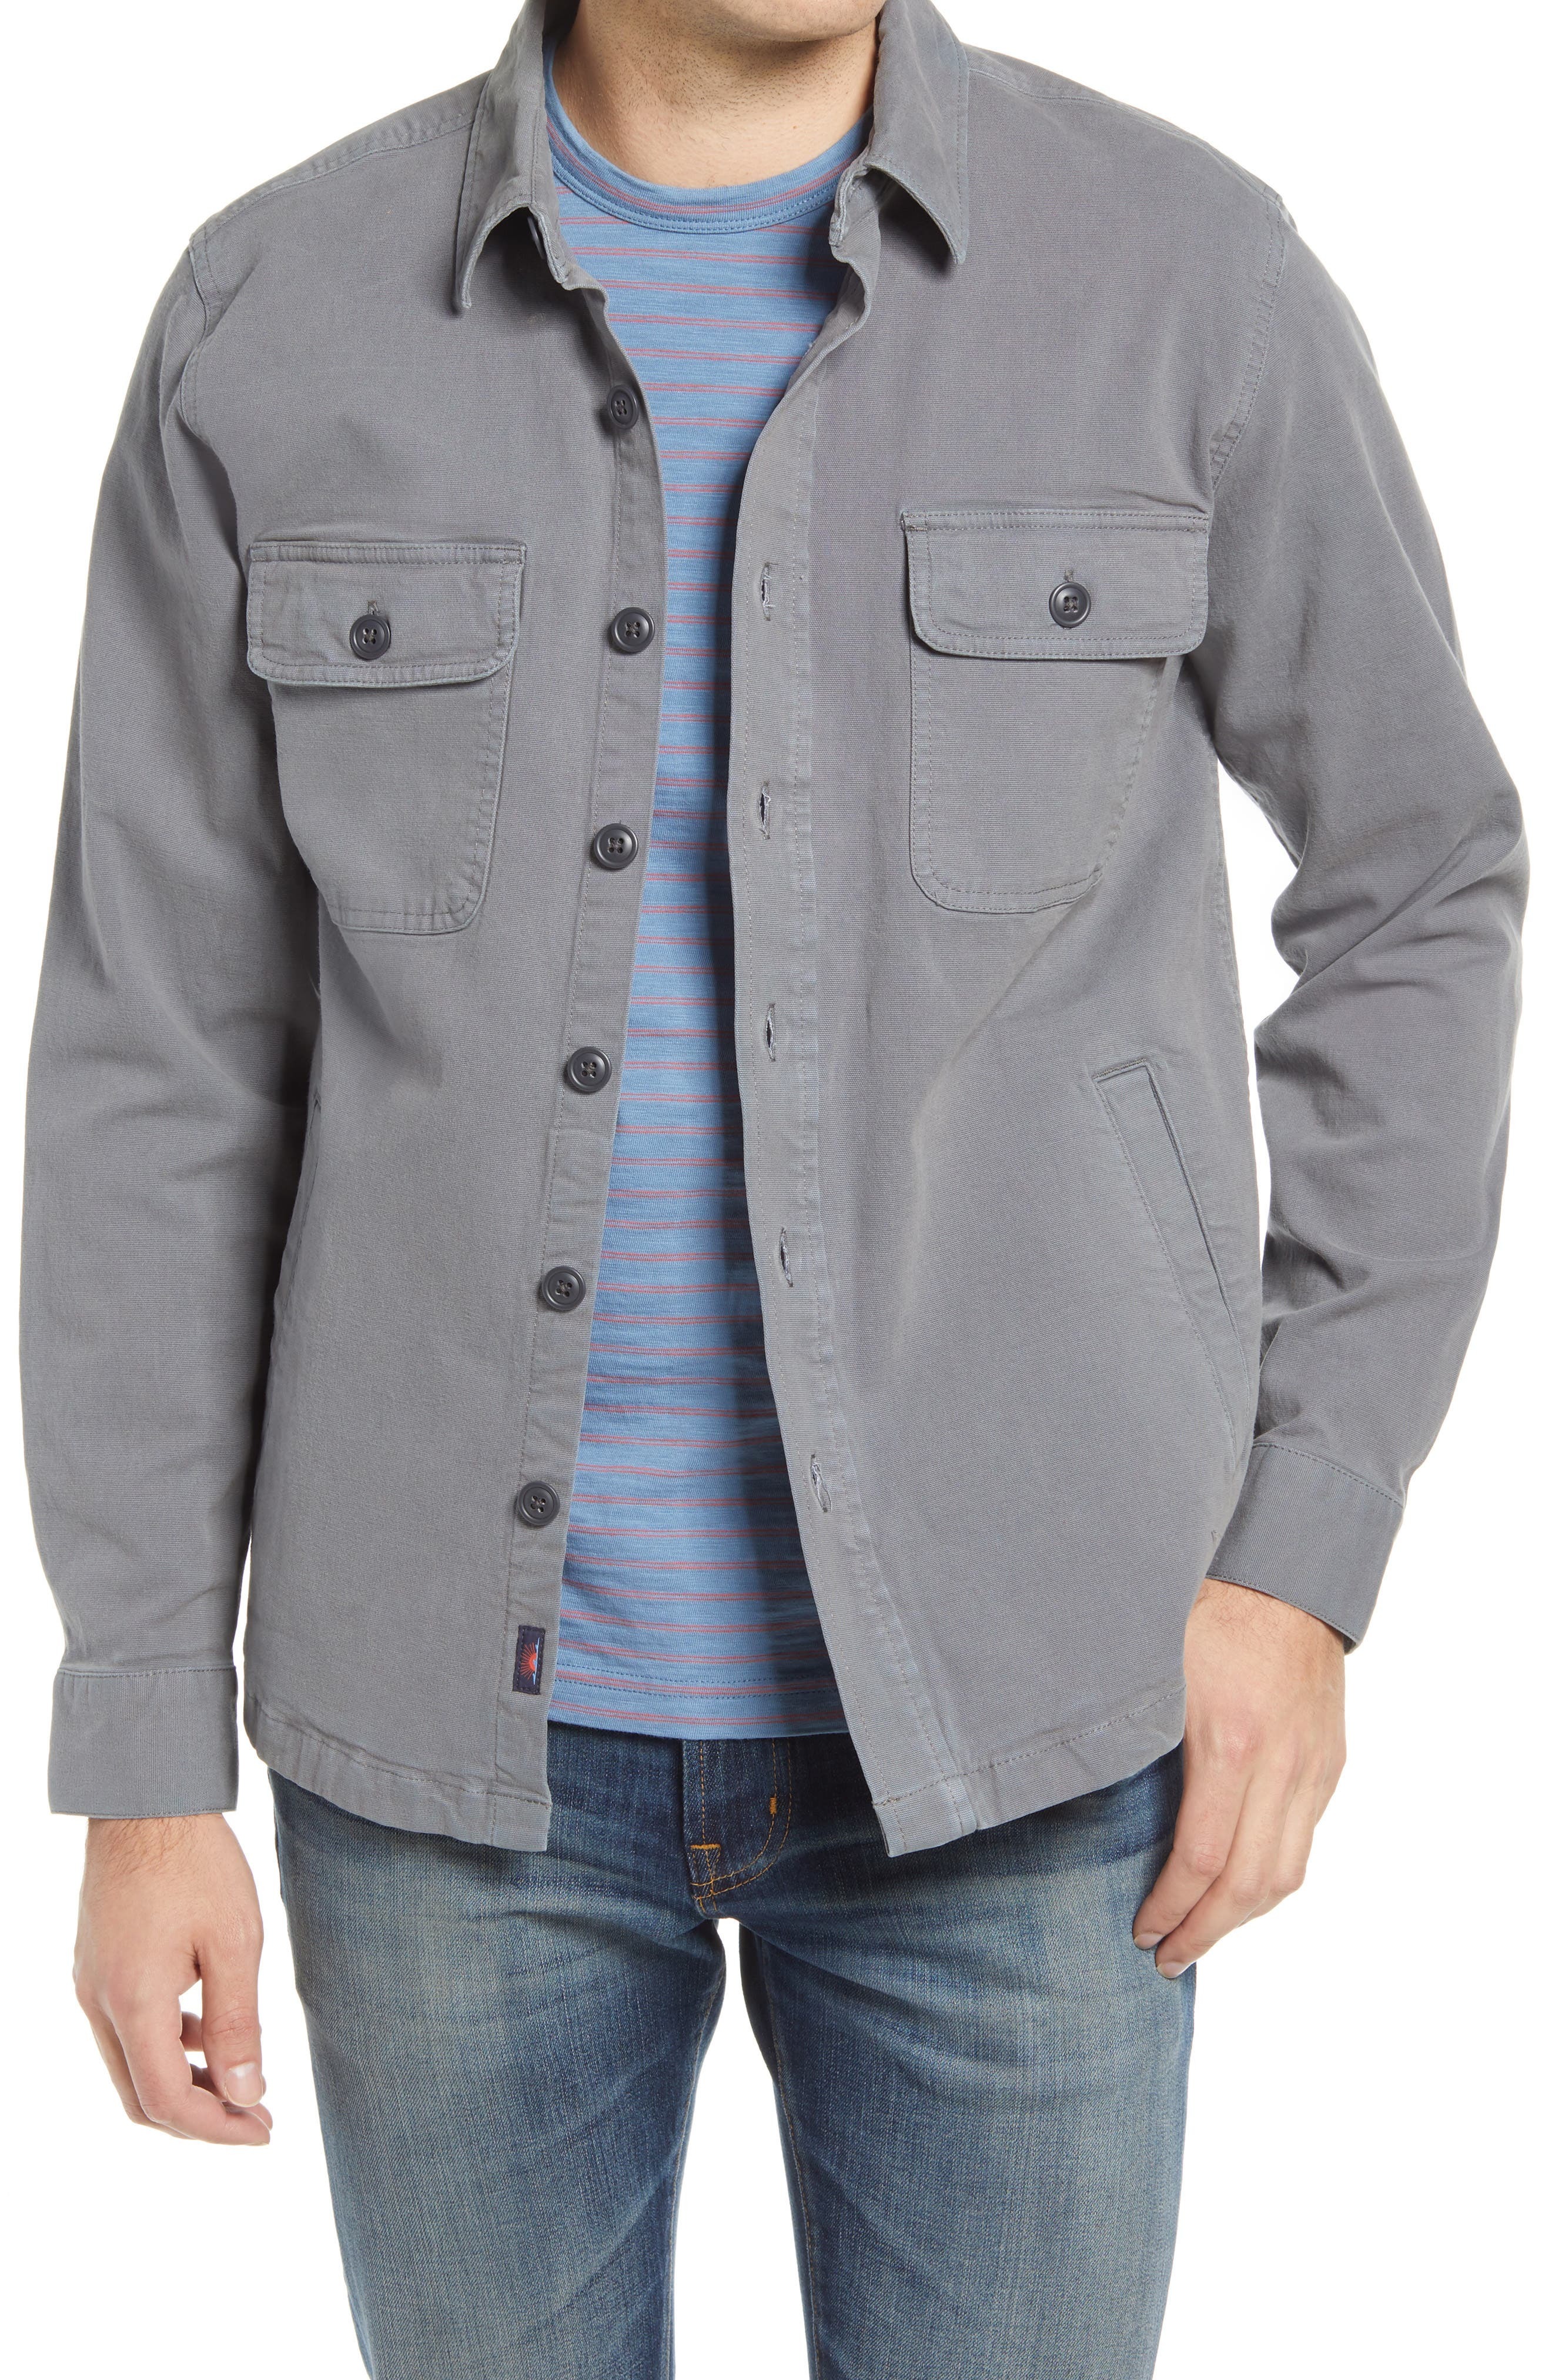 Faherty Cpo Unlined Stretch Cotton Shirt Jacket, $118 | Nordstrom